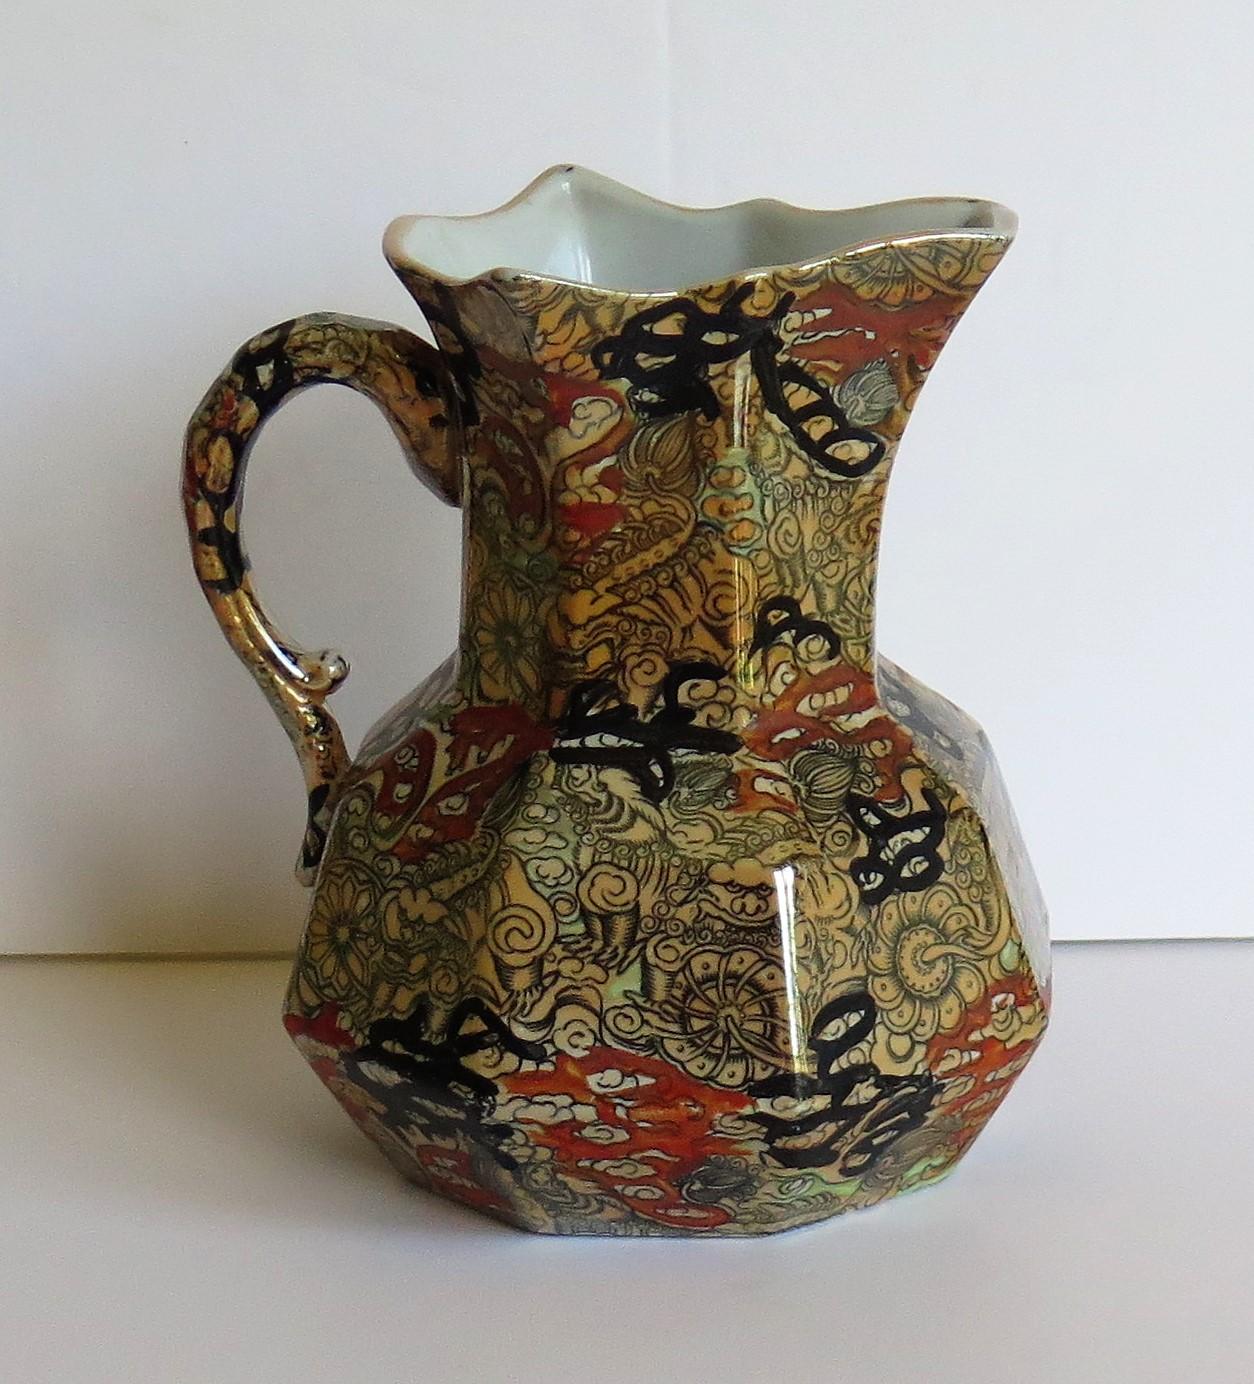 This is a very good hydra jug or pitcher decorated in the Bandana pattern and made by Mason's Ironstone, England in the 19th century, circa 1870.

The jug is octagonal in shape with the snake handle. These jugs were made in a range of sizes,